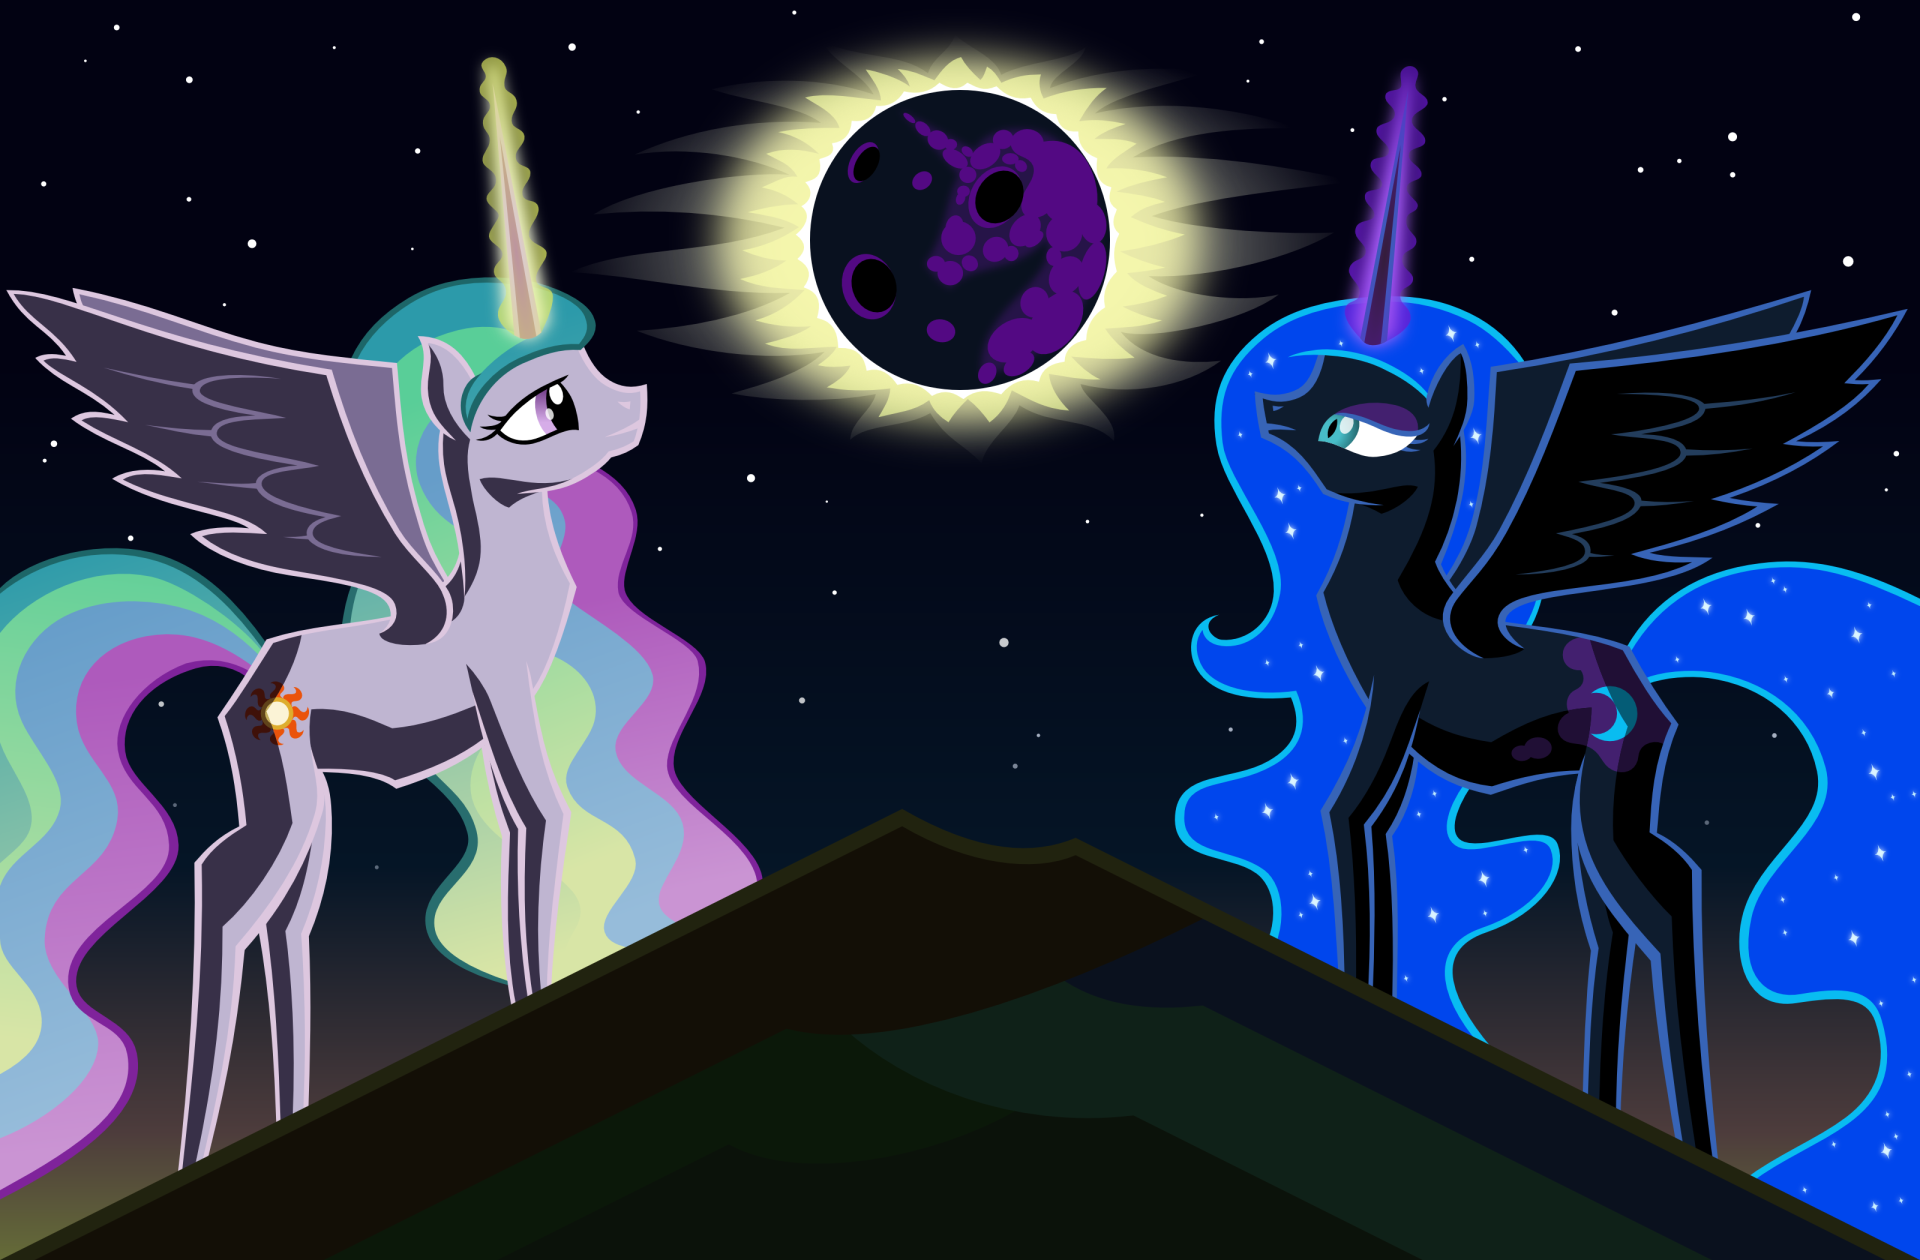 Eclipse by Dahtamnay